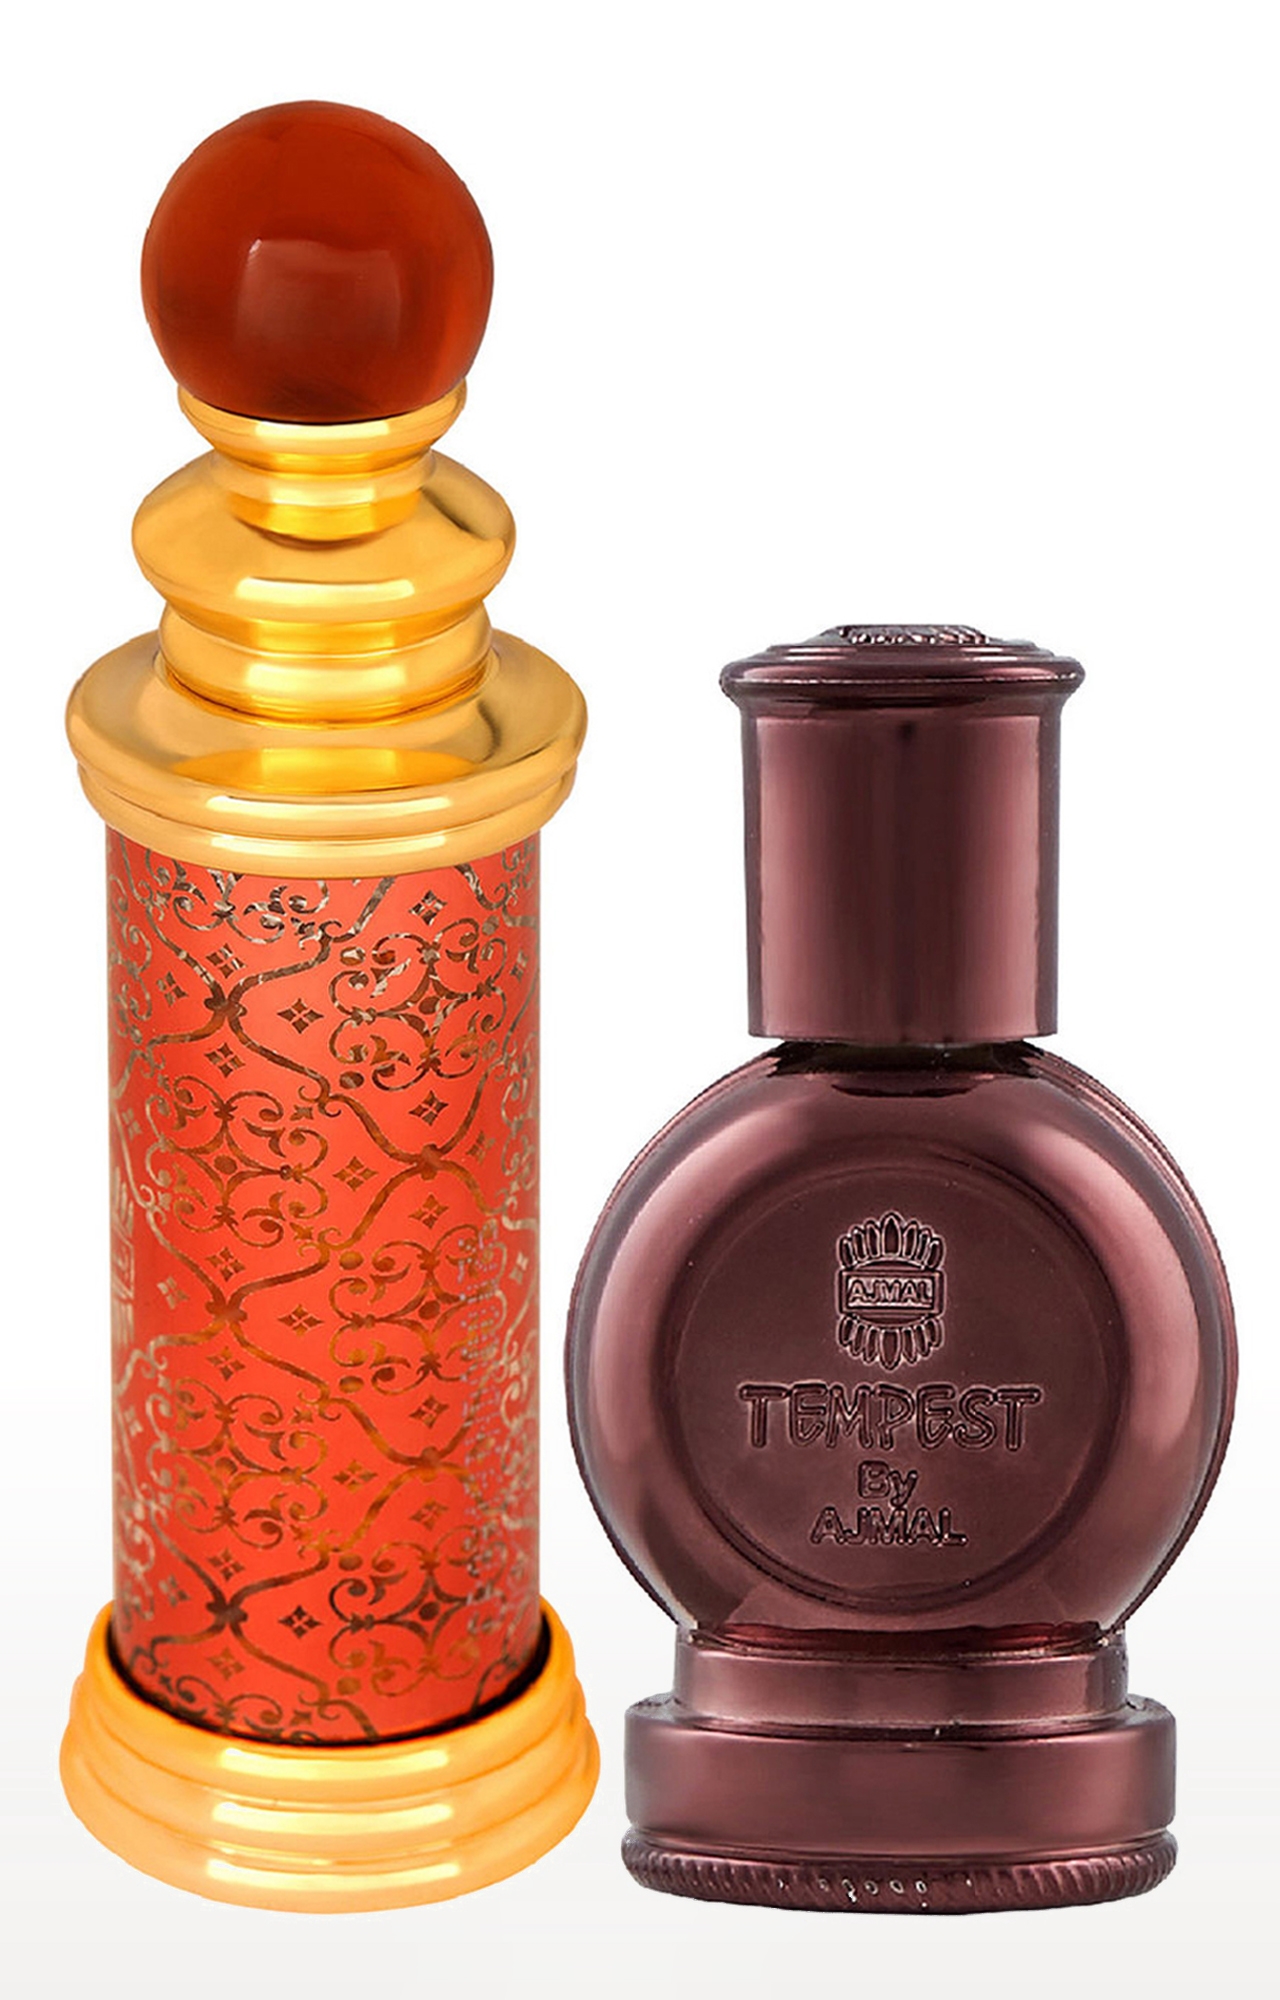 Ajmal | Ajmal Classic Oud Concentrated Perfume Oil Woody Oudh Alcohol- Attar 10Ml For Unisex And Tempest Concentrated Perfume Oil Floral Alcohol- Attar 12Ml For Unisex